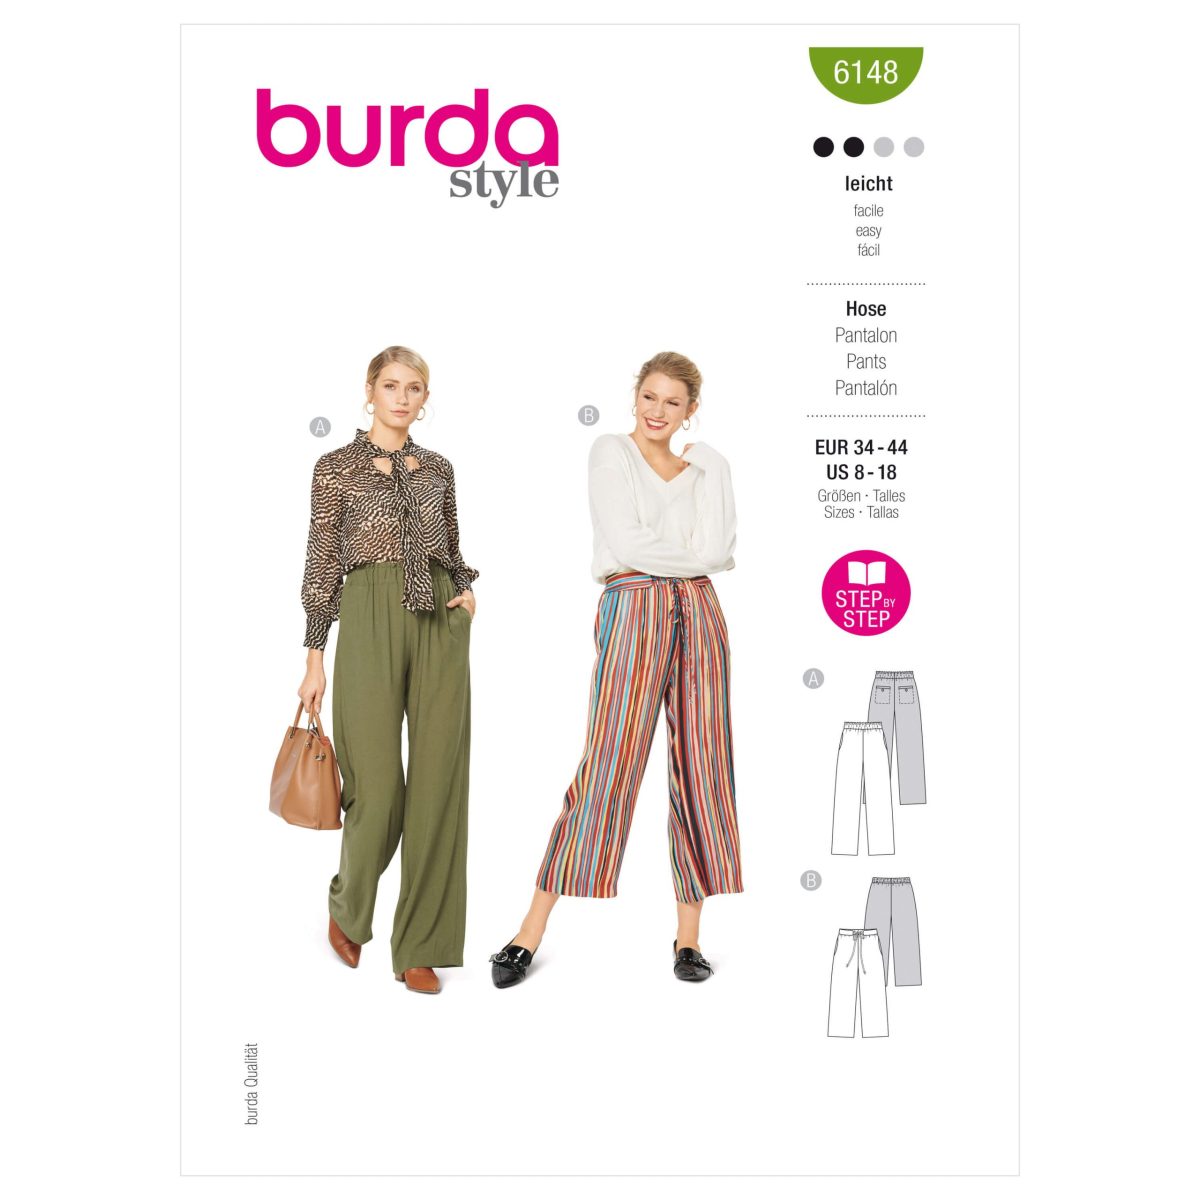 Burda Style Pattern 6148 Misses' Trousers in two lengths